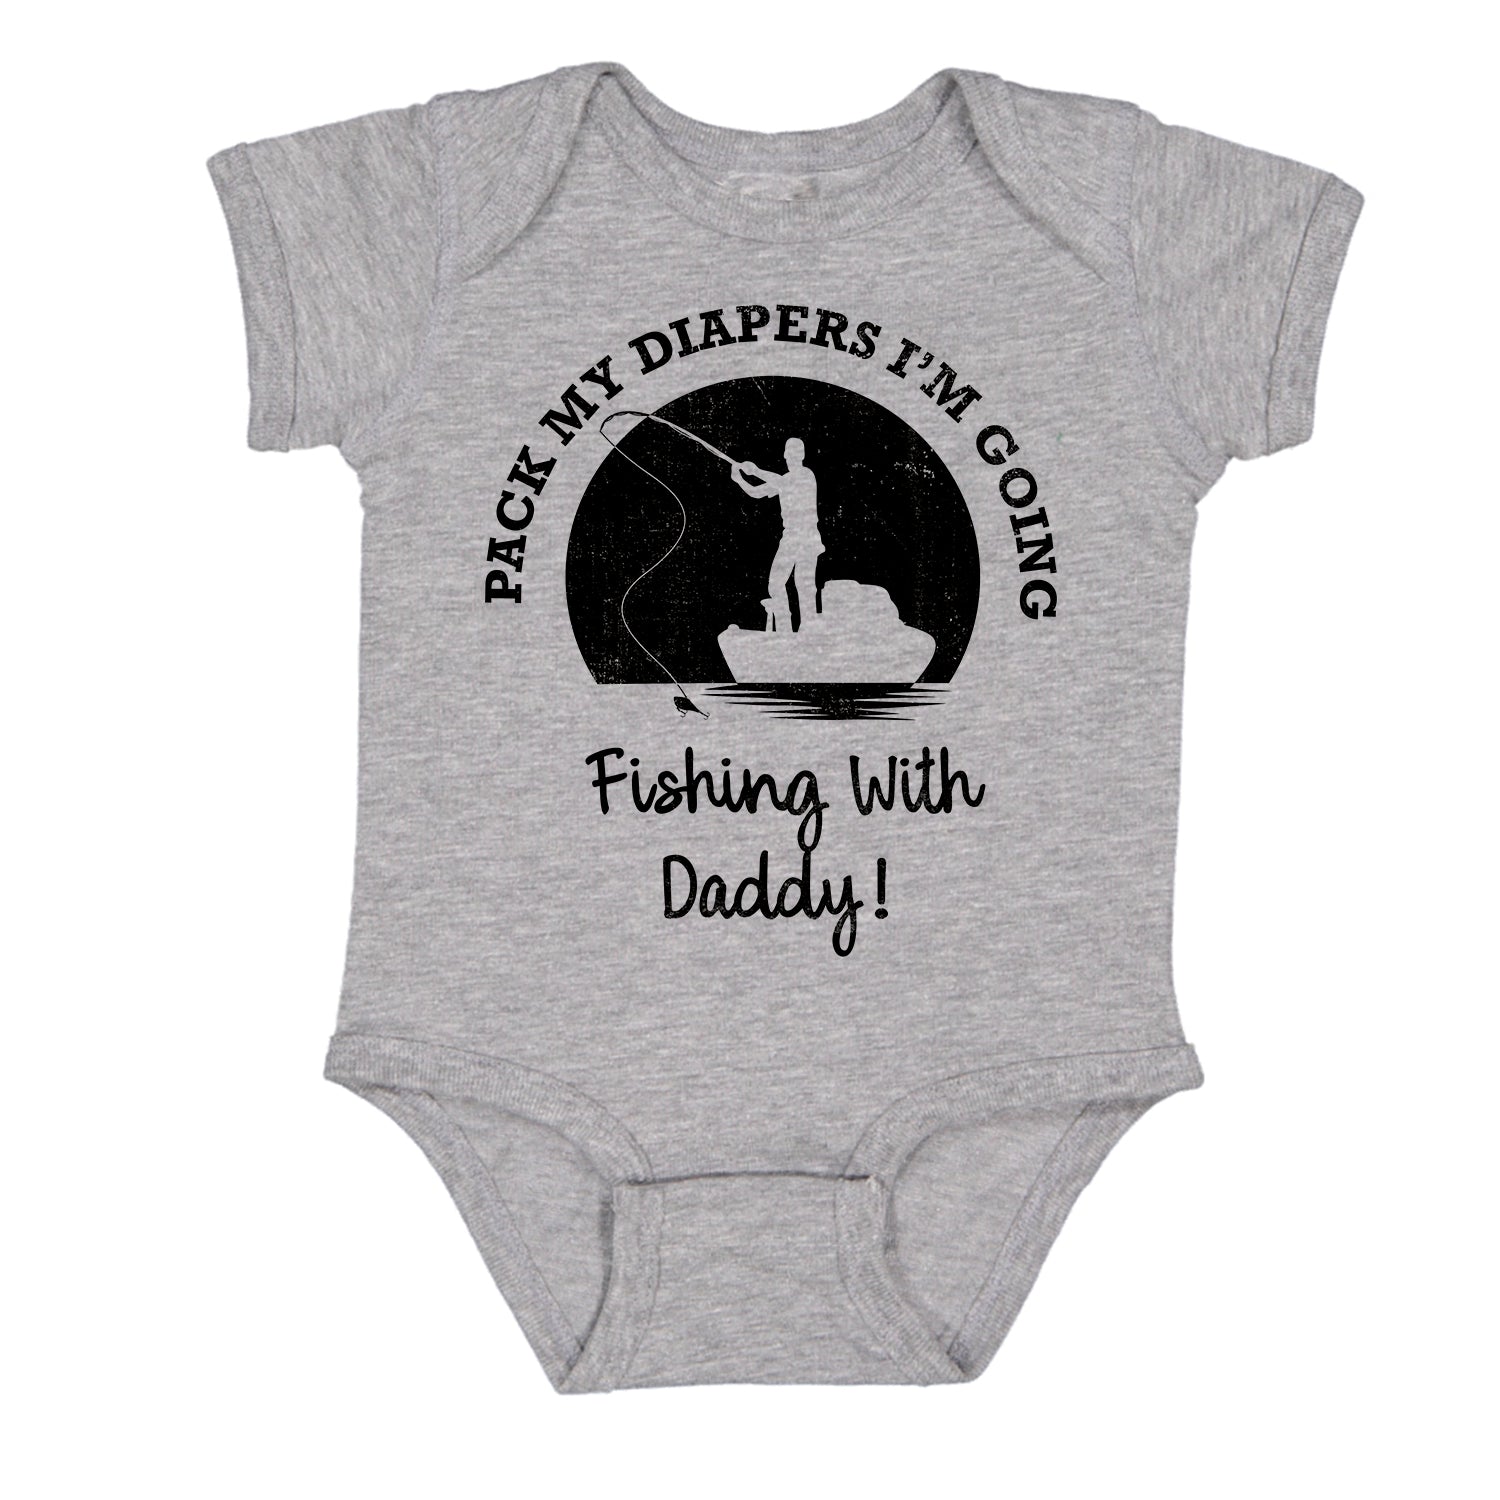 Ink Trendz Pack My Diapers I'm Going Fishing with Daddy! Cute Fishing Baby Bodysuit Heather Grey / 24 Months